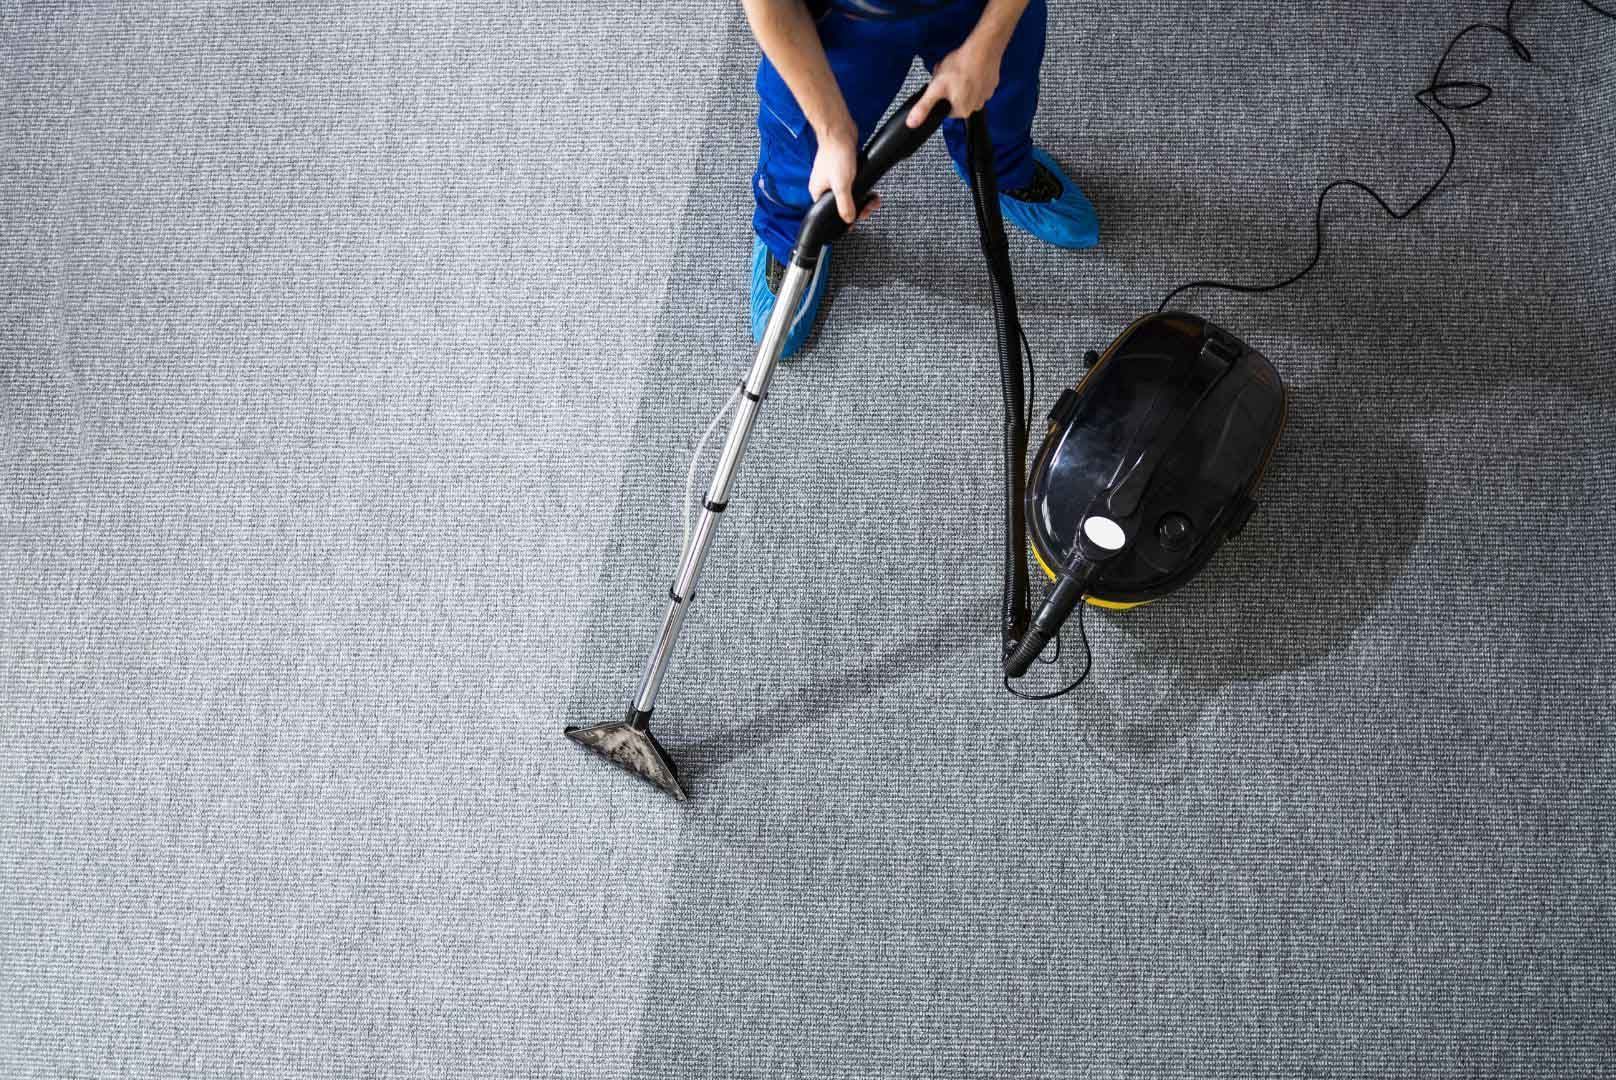 A person is using a vacuum cleaner to clean a carpet.